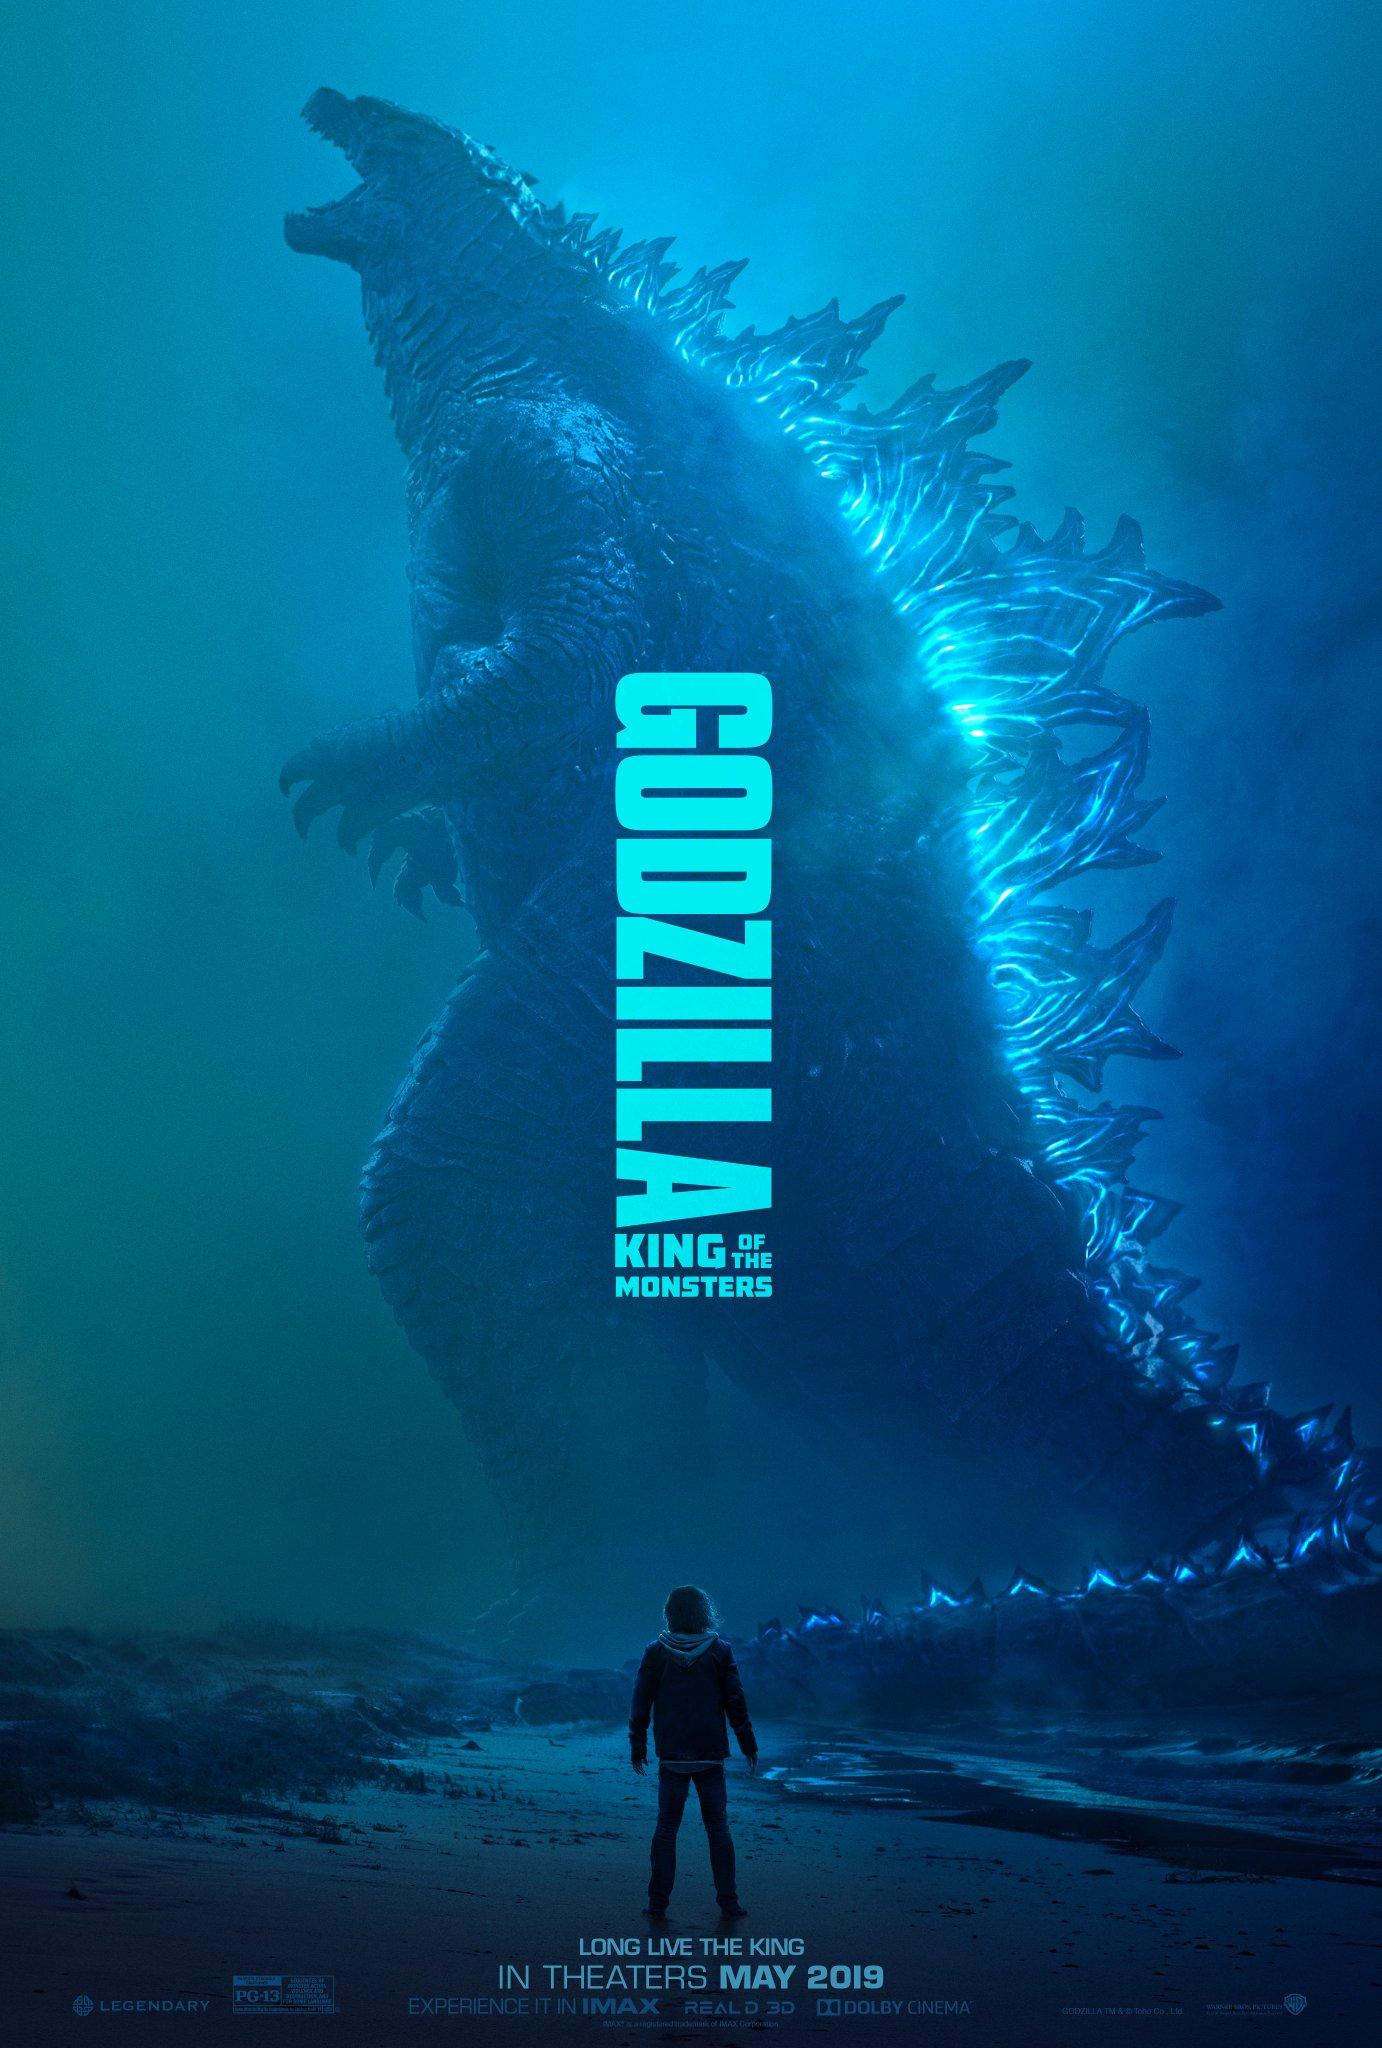 Godzilla: King of the Monsters Image Tease a Titanic Tussle